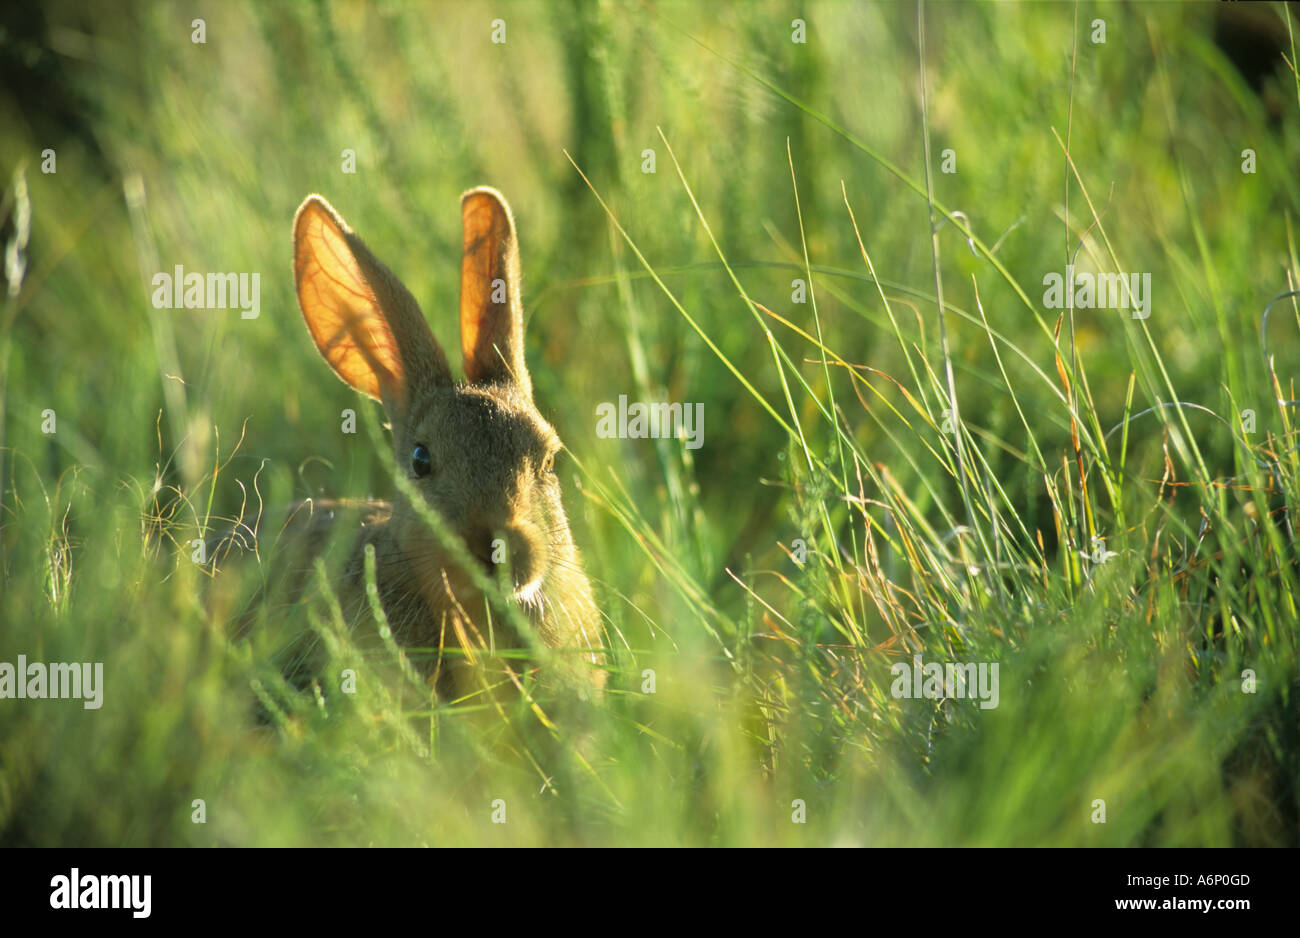 adult Smith's Red Rock Rabbit (Pronolagus rupestris), Free State, South Africa Stock Photo